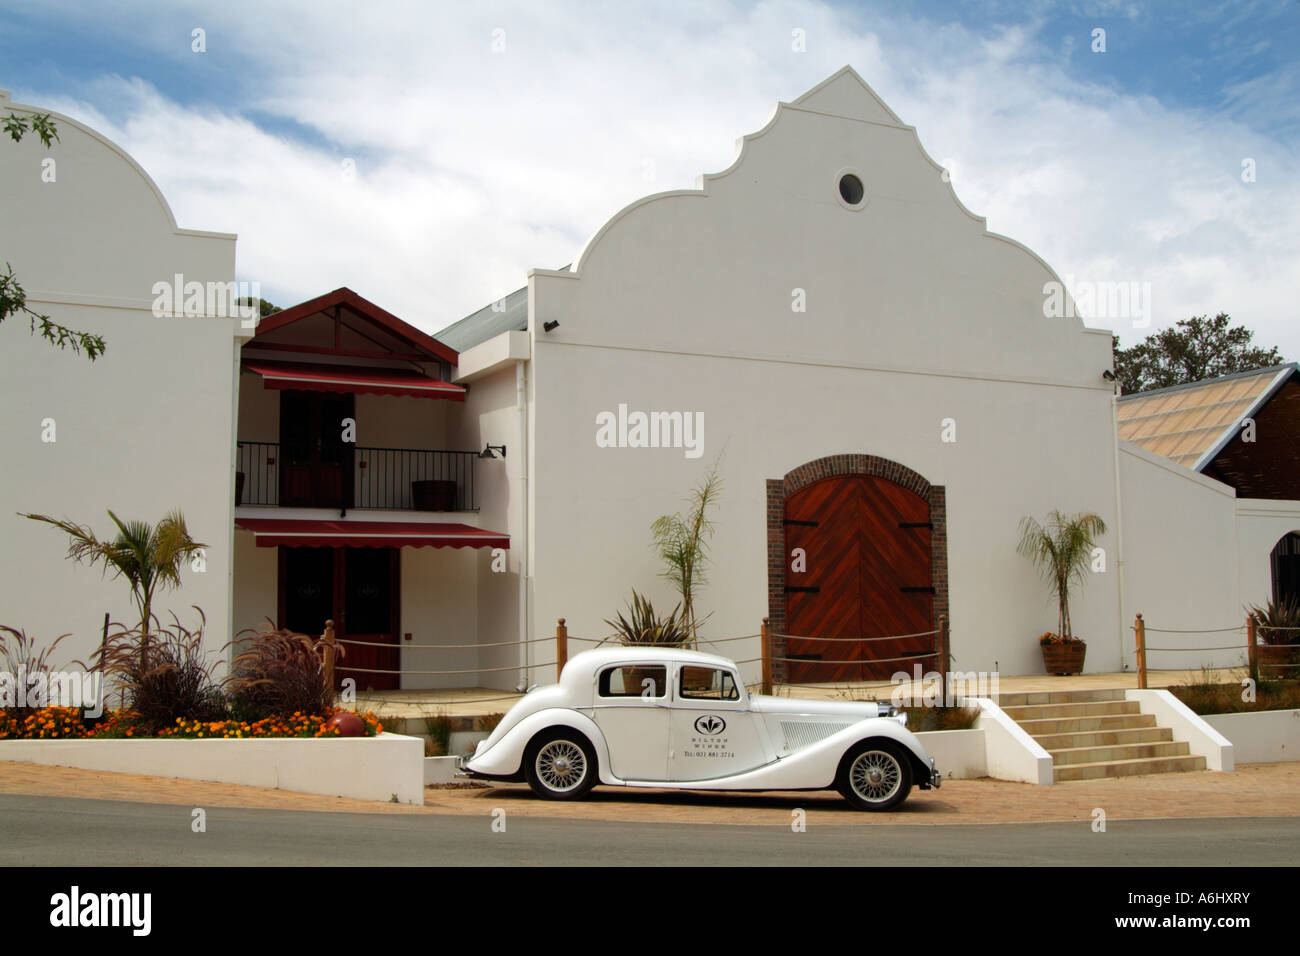 Vintage Jaguar classic motor car at Bilton Winery at Helderberg on the Stellenbosch wine route South Africa RSA Visitor attracti Stock Photo